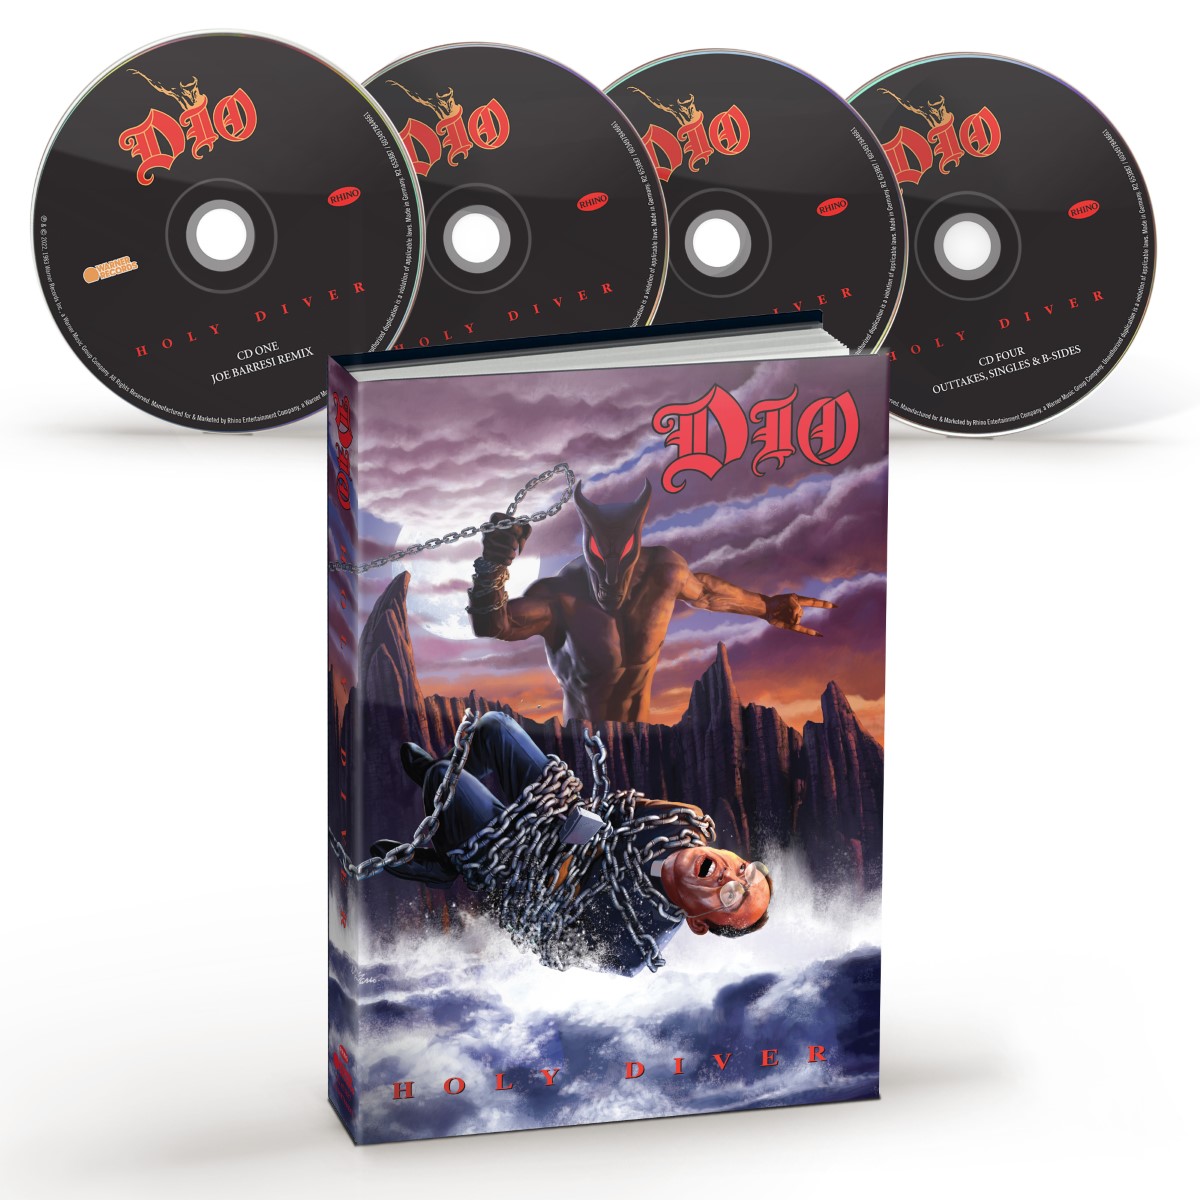 Celebrate The Late Ronnie James Dio’s 80th Birthday With 4-CD Holy Diver Super Deluxe Edition